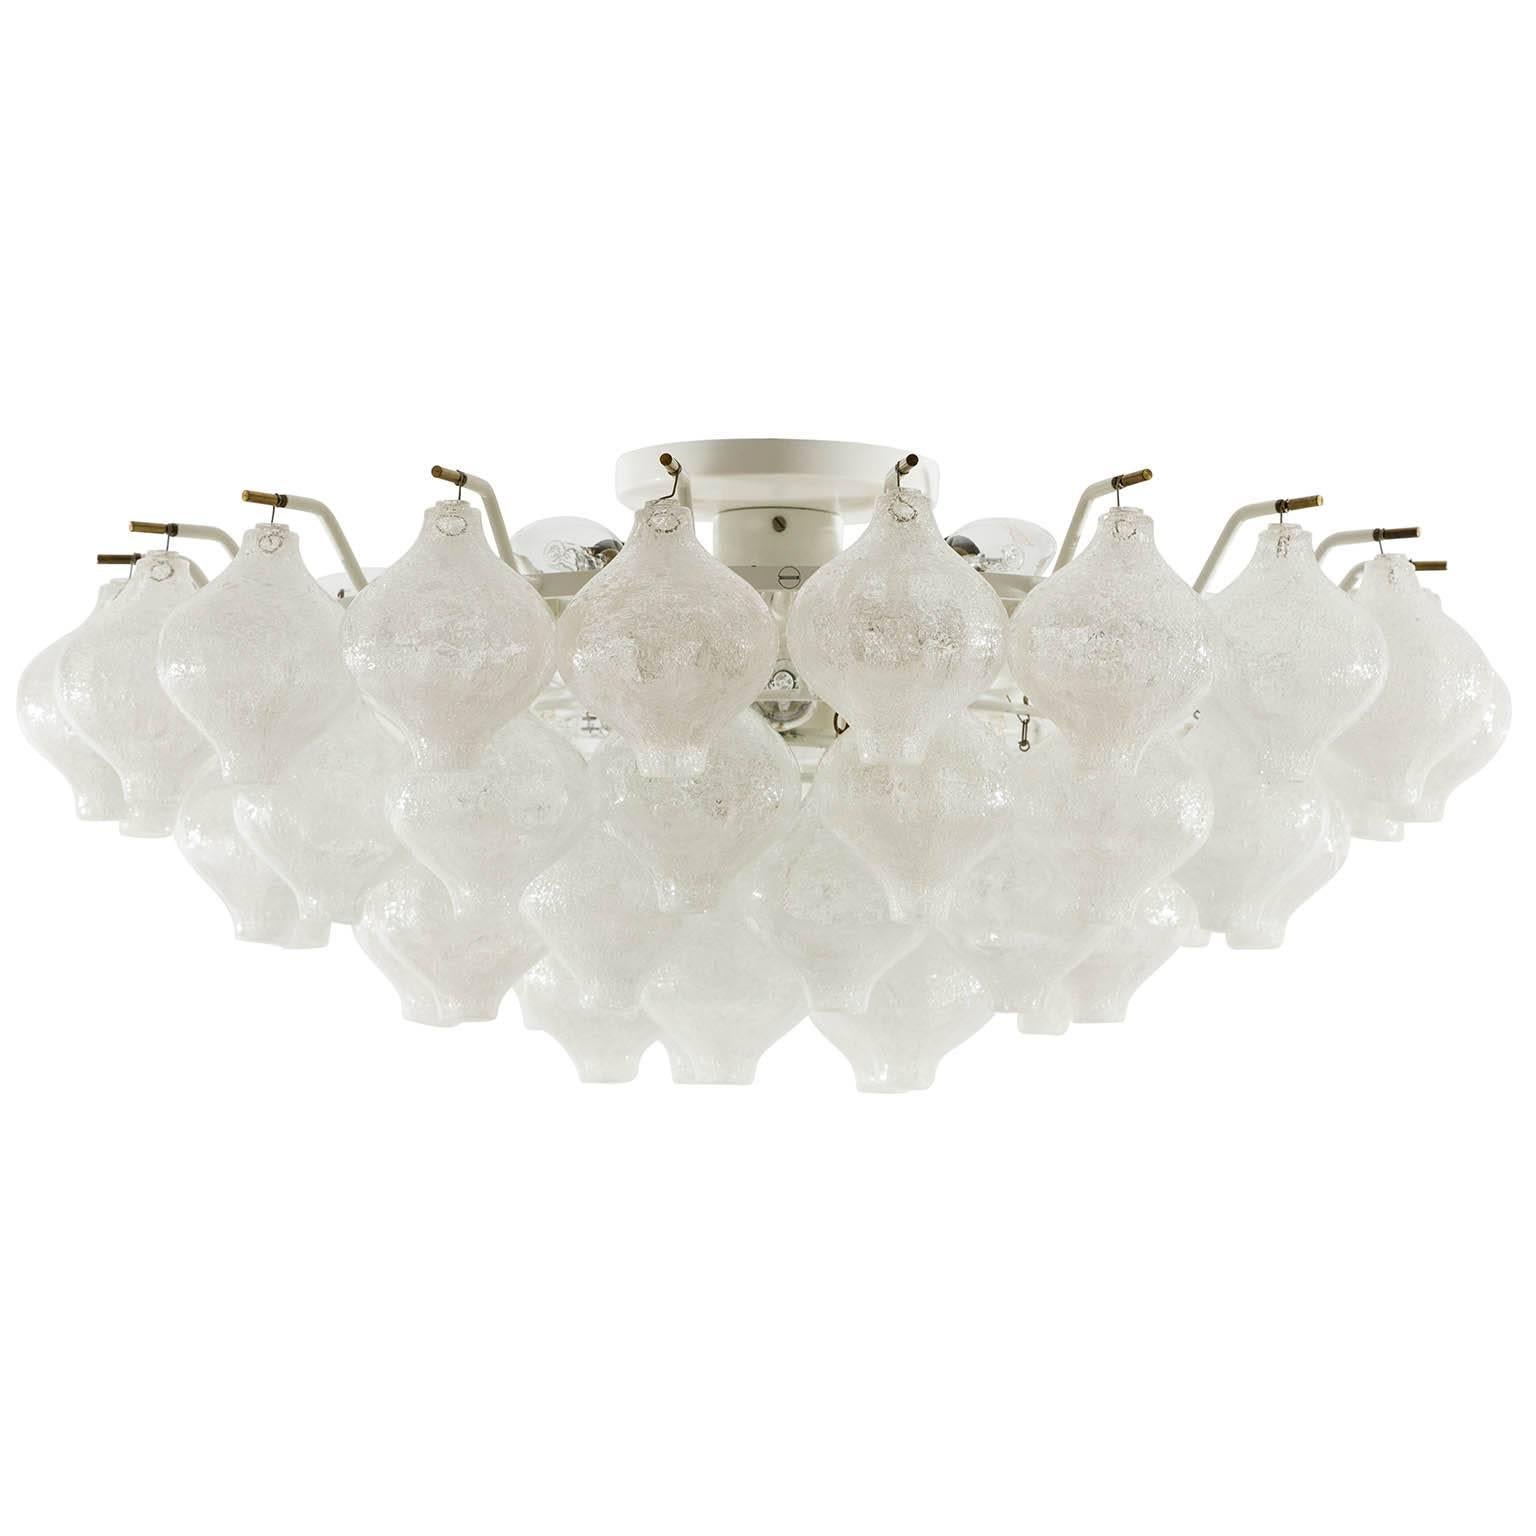 A large and fantastic "Tulipan" flush mount chandelier by J.T. Kalmar, Austria, Vienna, manufactured in midcentury (late 1960s or early 1970s).
The name Tulipan derives from the tulip shaped handblown bubble glasses. 51 glasses are mounted